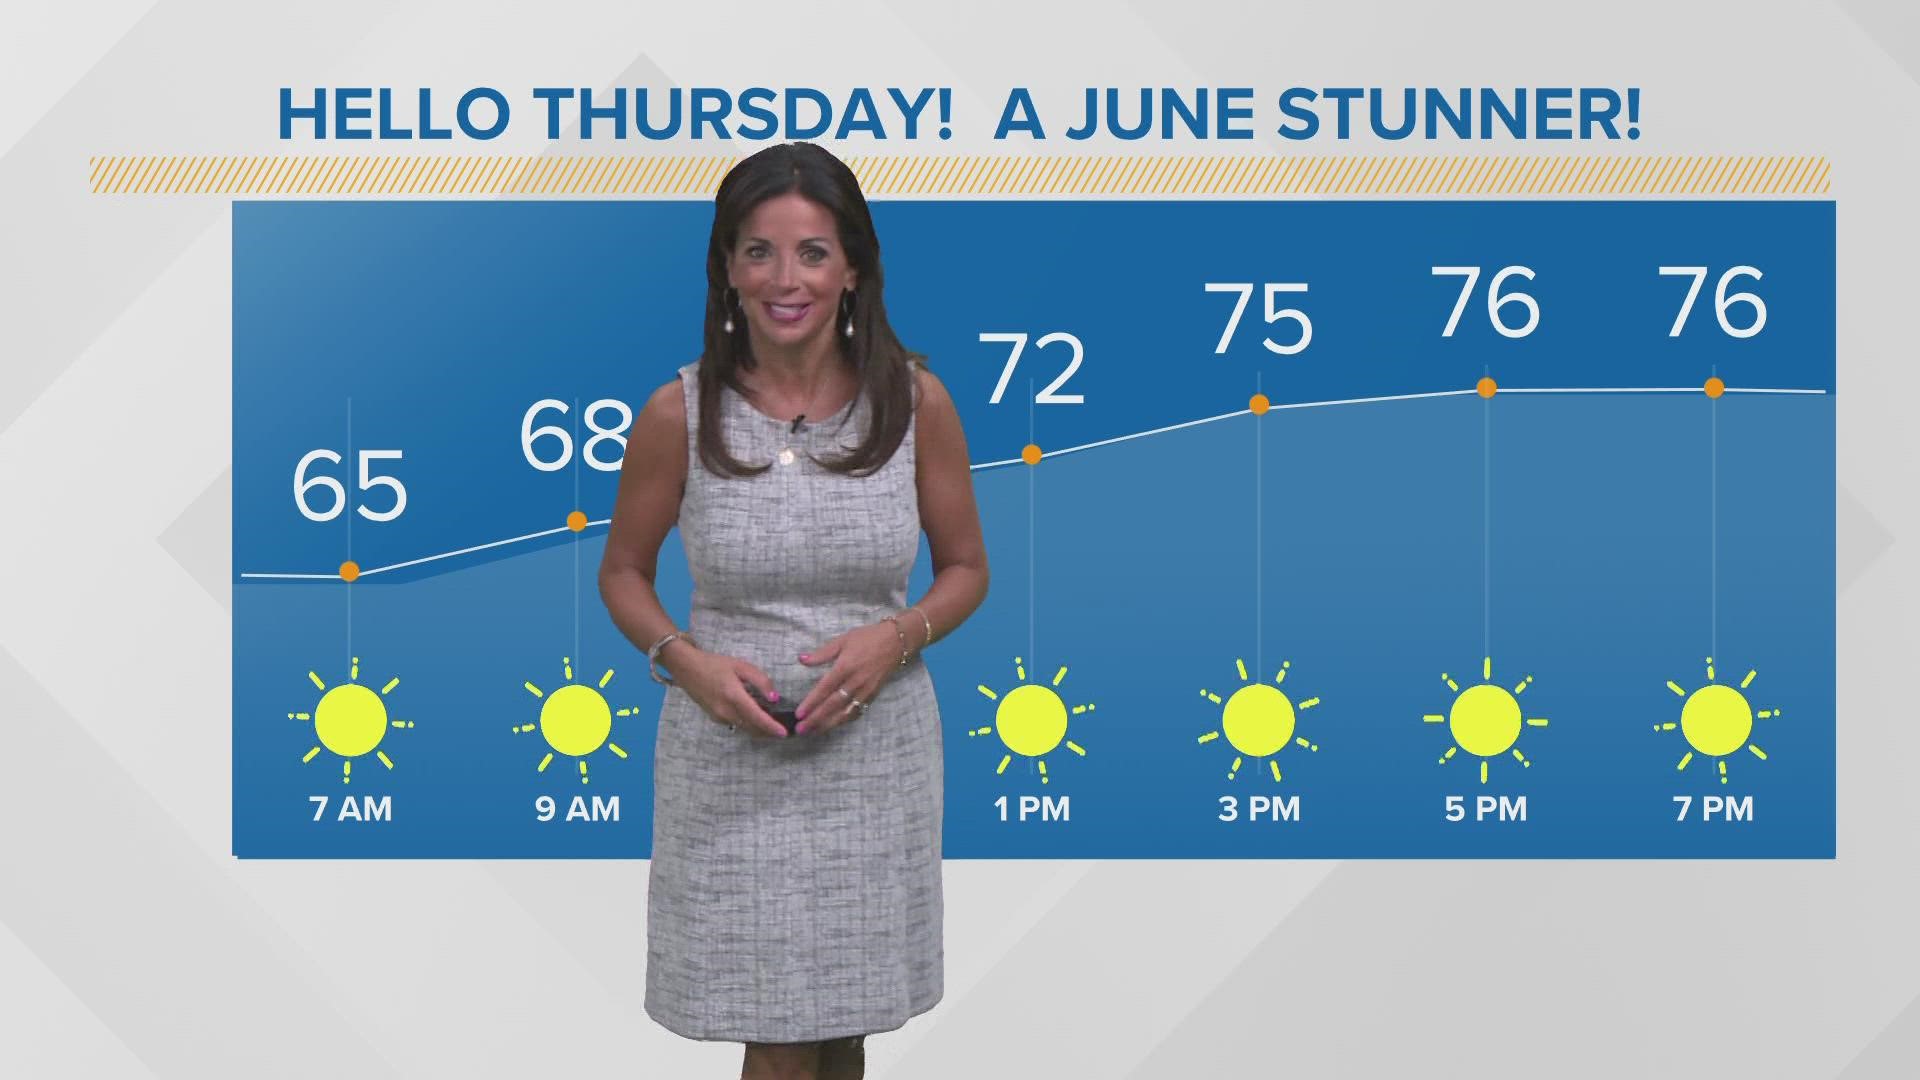 Lots of sunshine is coming today with cooler conditions. Hollie Strano has the hour-by-hour details in her morning weather forecast for June 23, 2022.